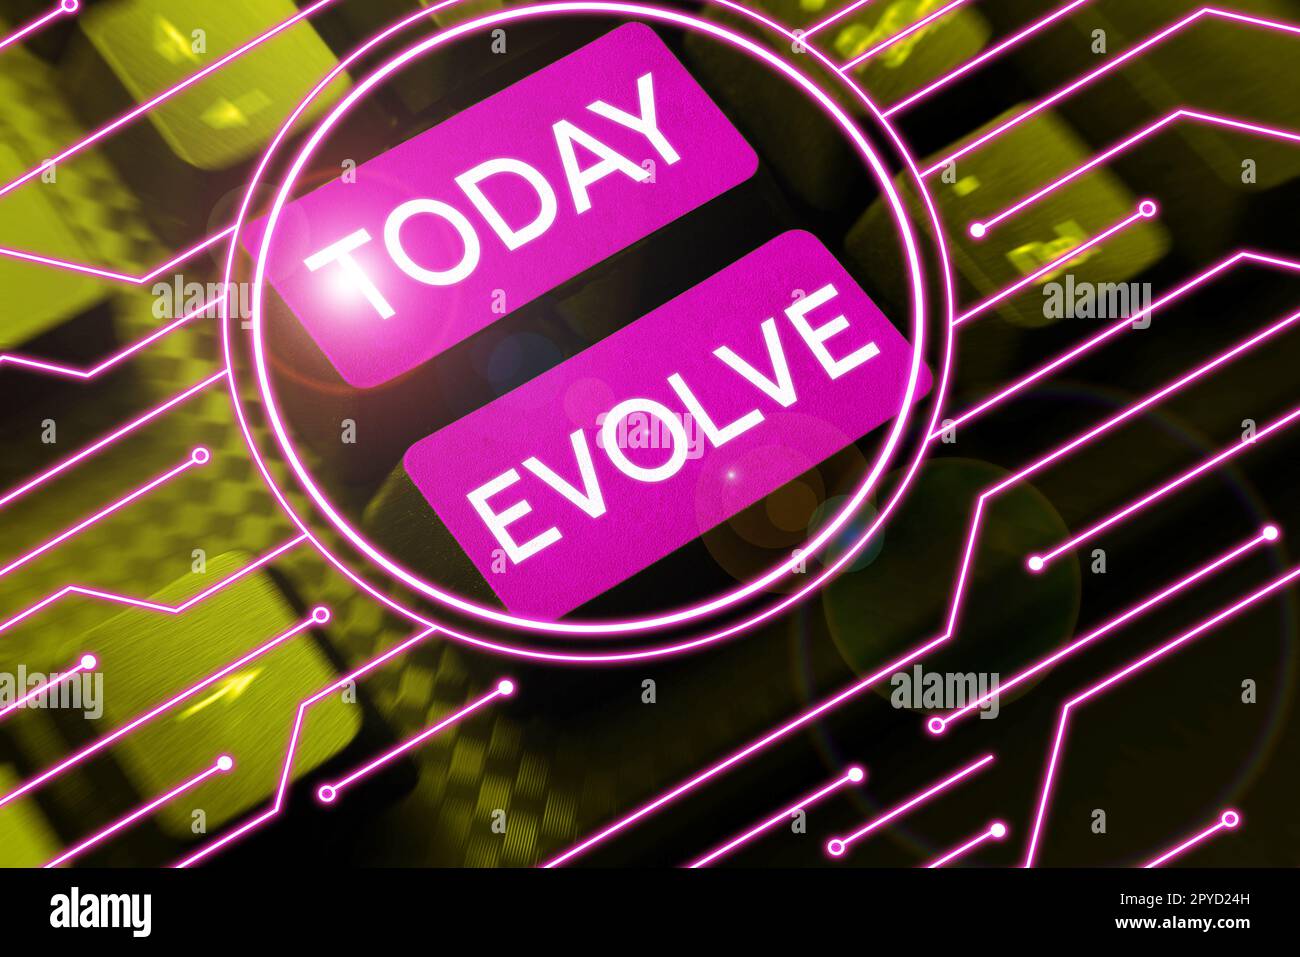 Text showing inspiration Evolve. Word for develop gradually Improve your skills physique or personality Stock Photo